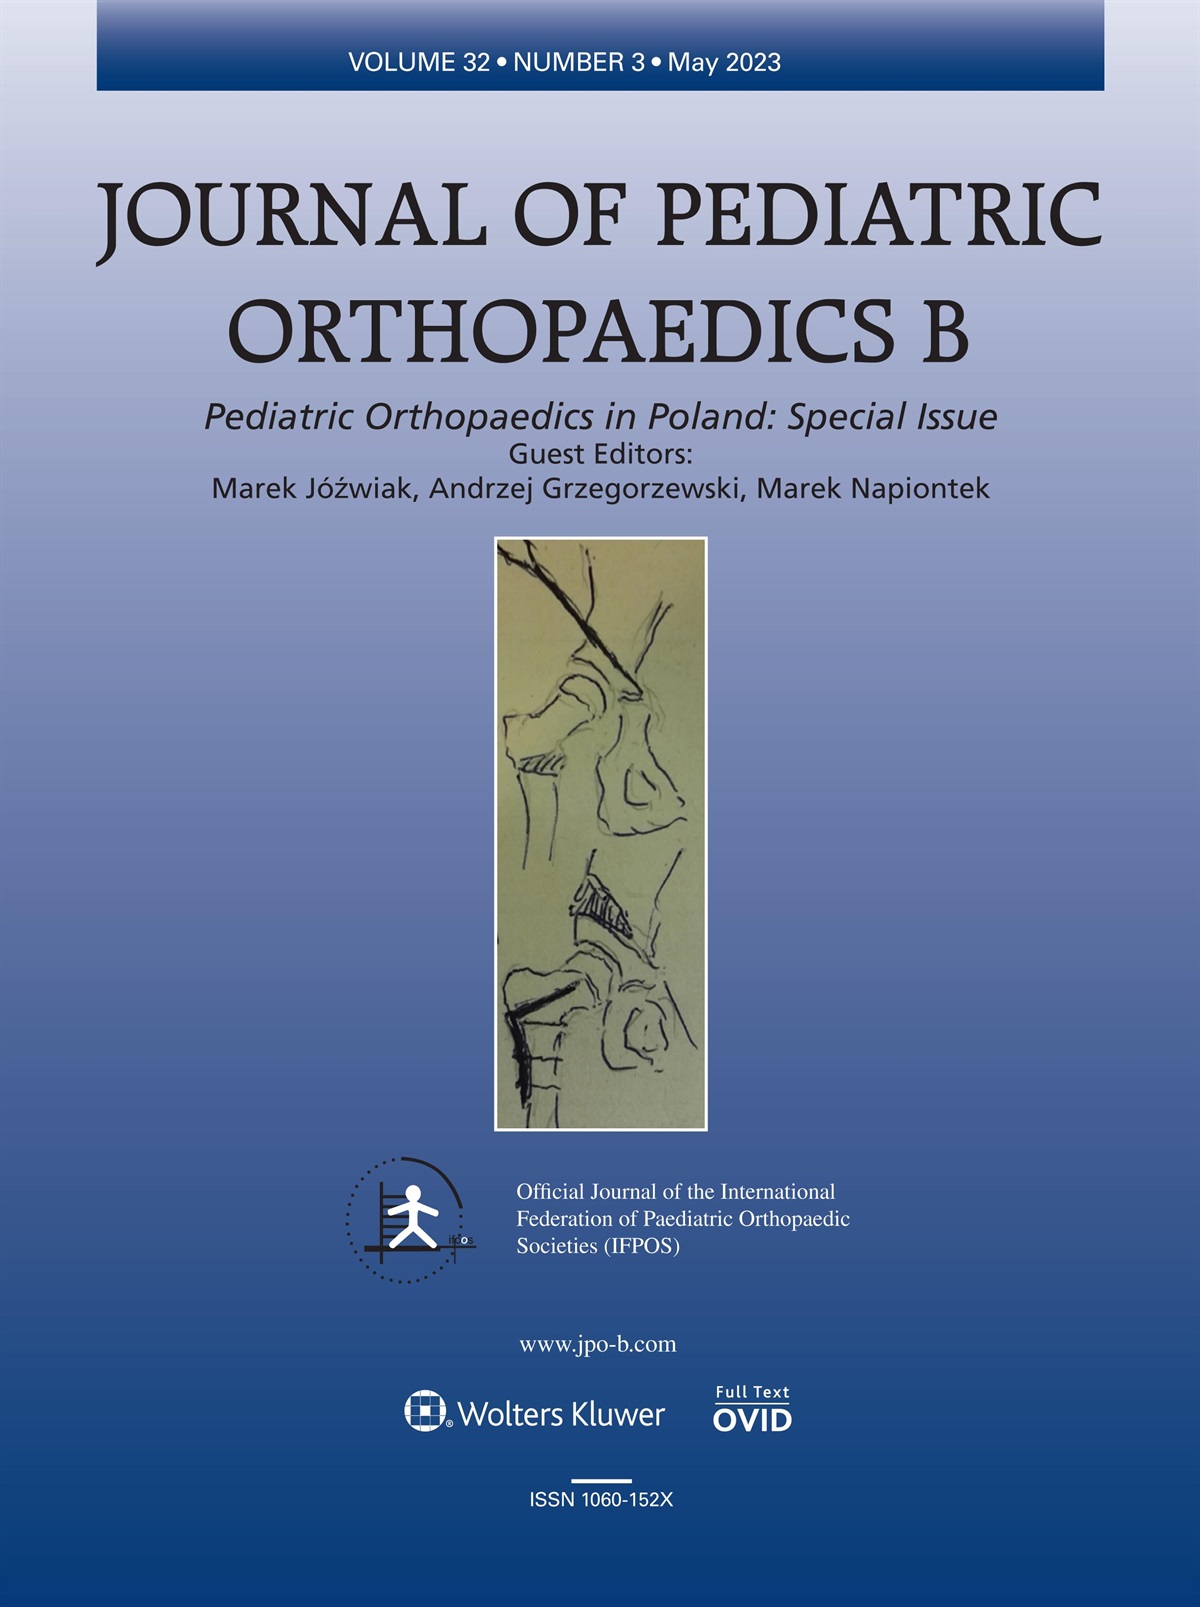 Response to Letter to the Editor regarding ‘The trochlear physeal line angle: a novel method to assess coronal plane alignment of the pediatric distal humerus’ J Pediatr Orthop B 2023; 32:206.